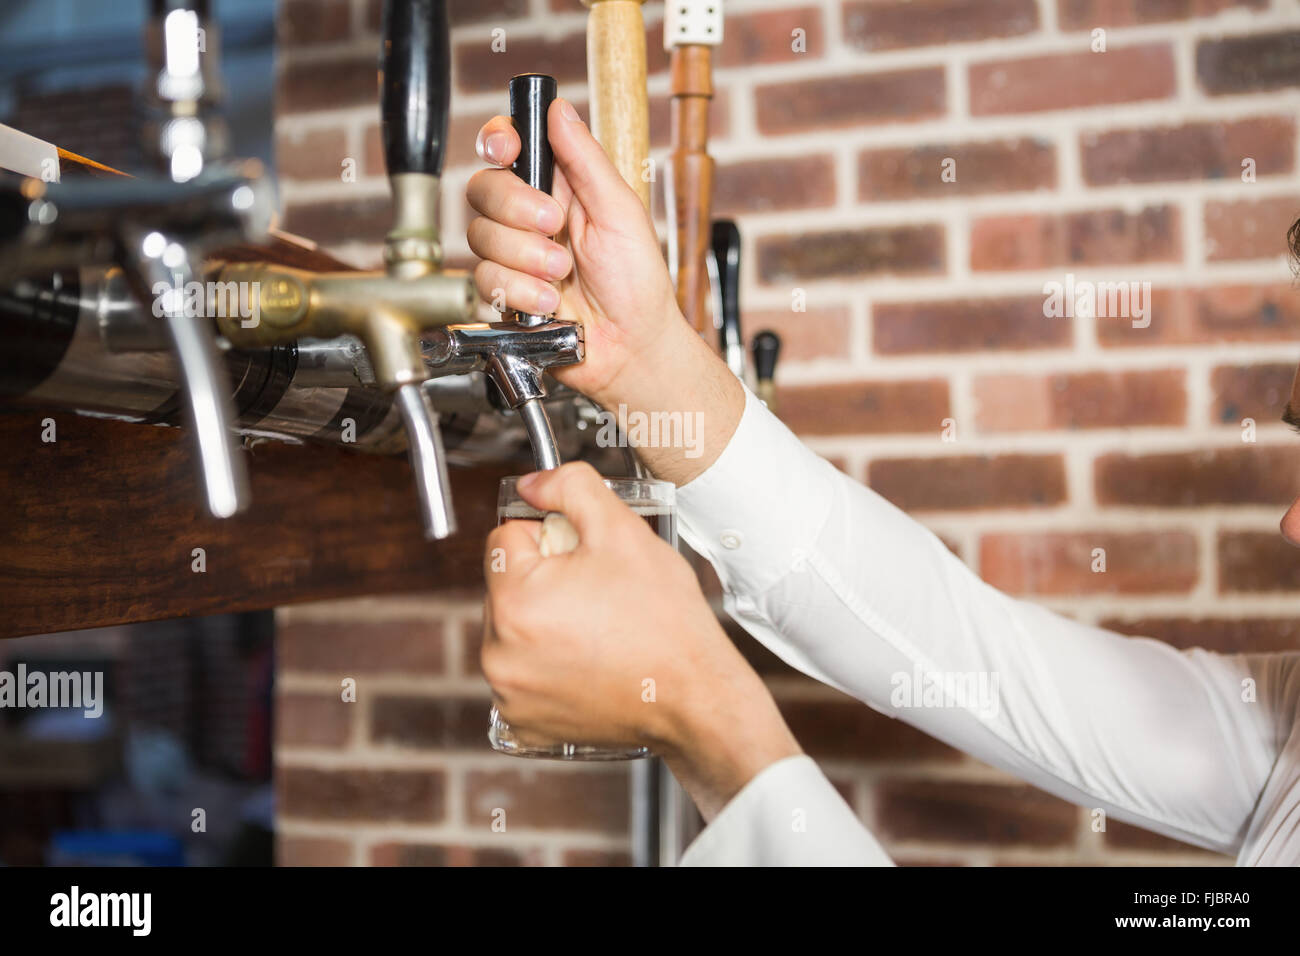 Masculine hands pouring beer Stock Photo